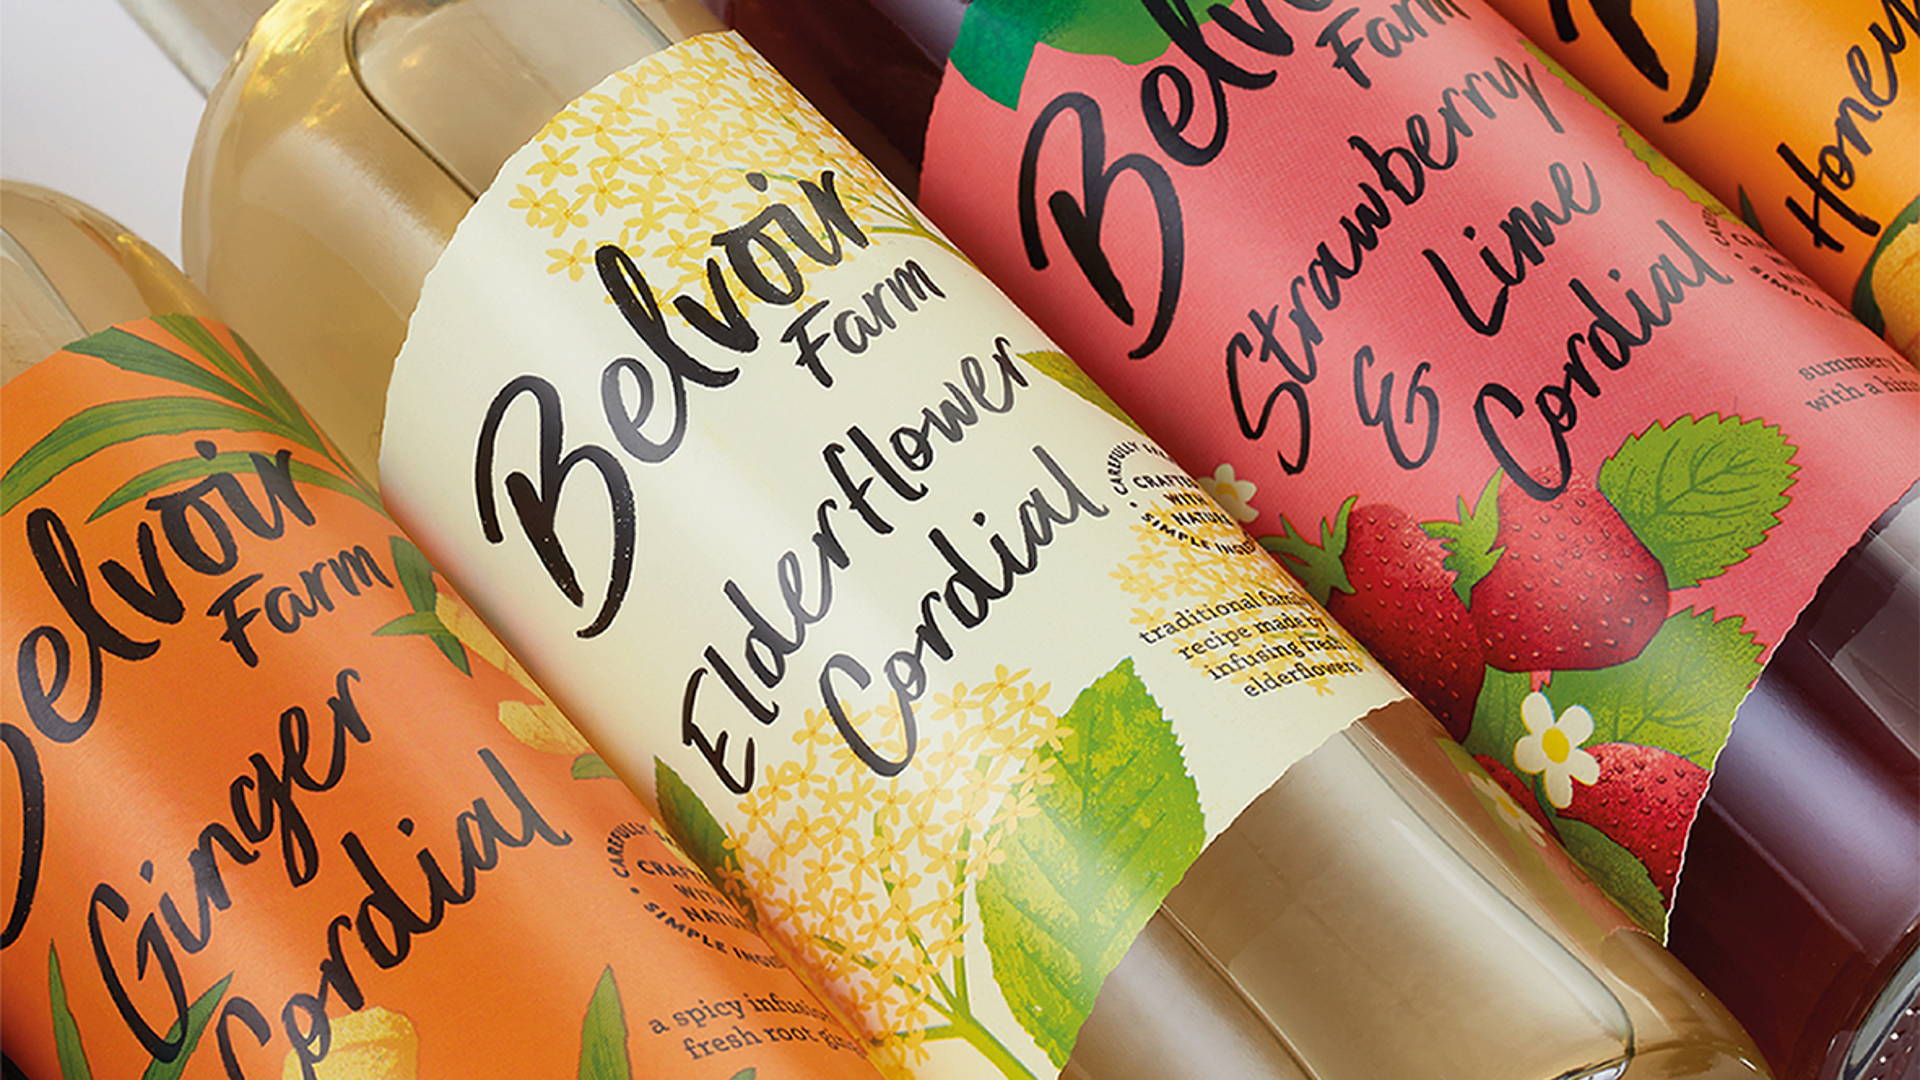 Featured image for Belvoir Farm, An Invigorating Soda That Deserved To Be Reinvigorated